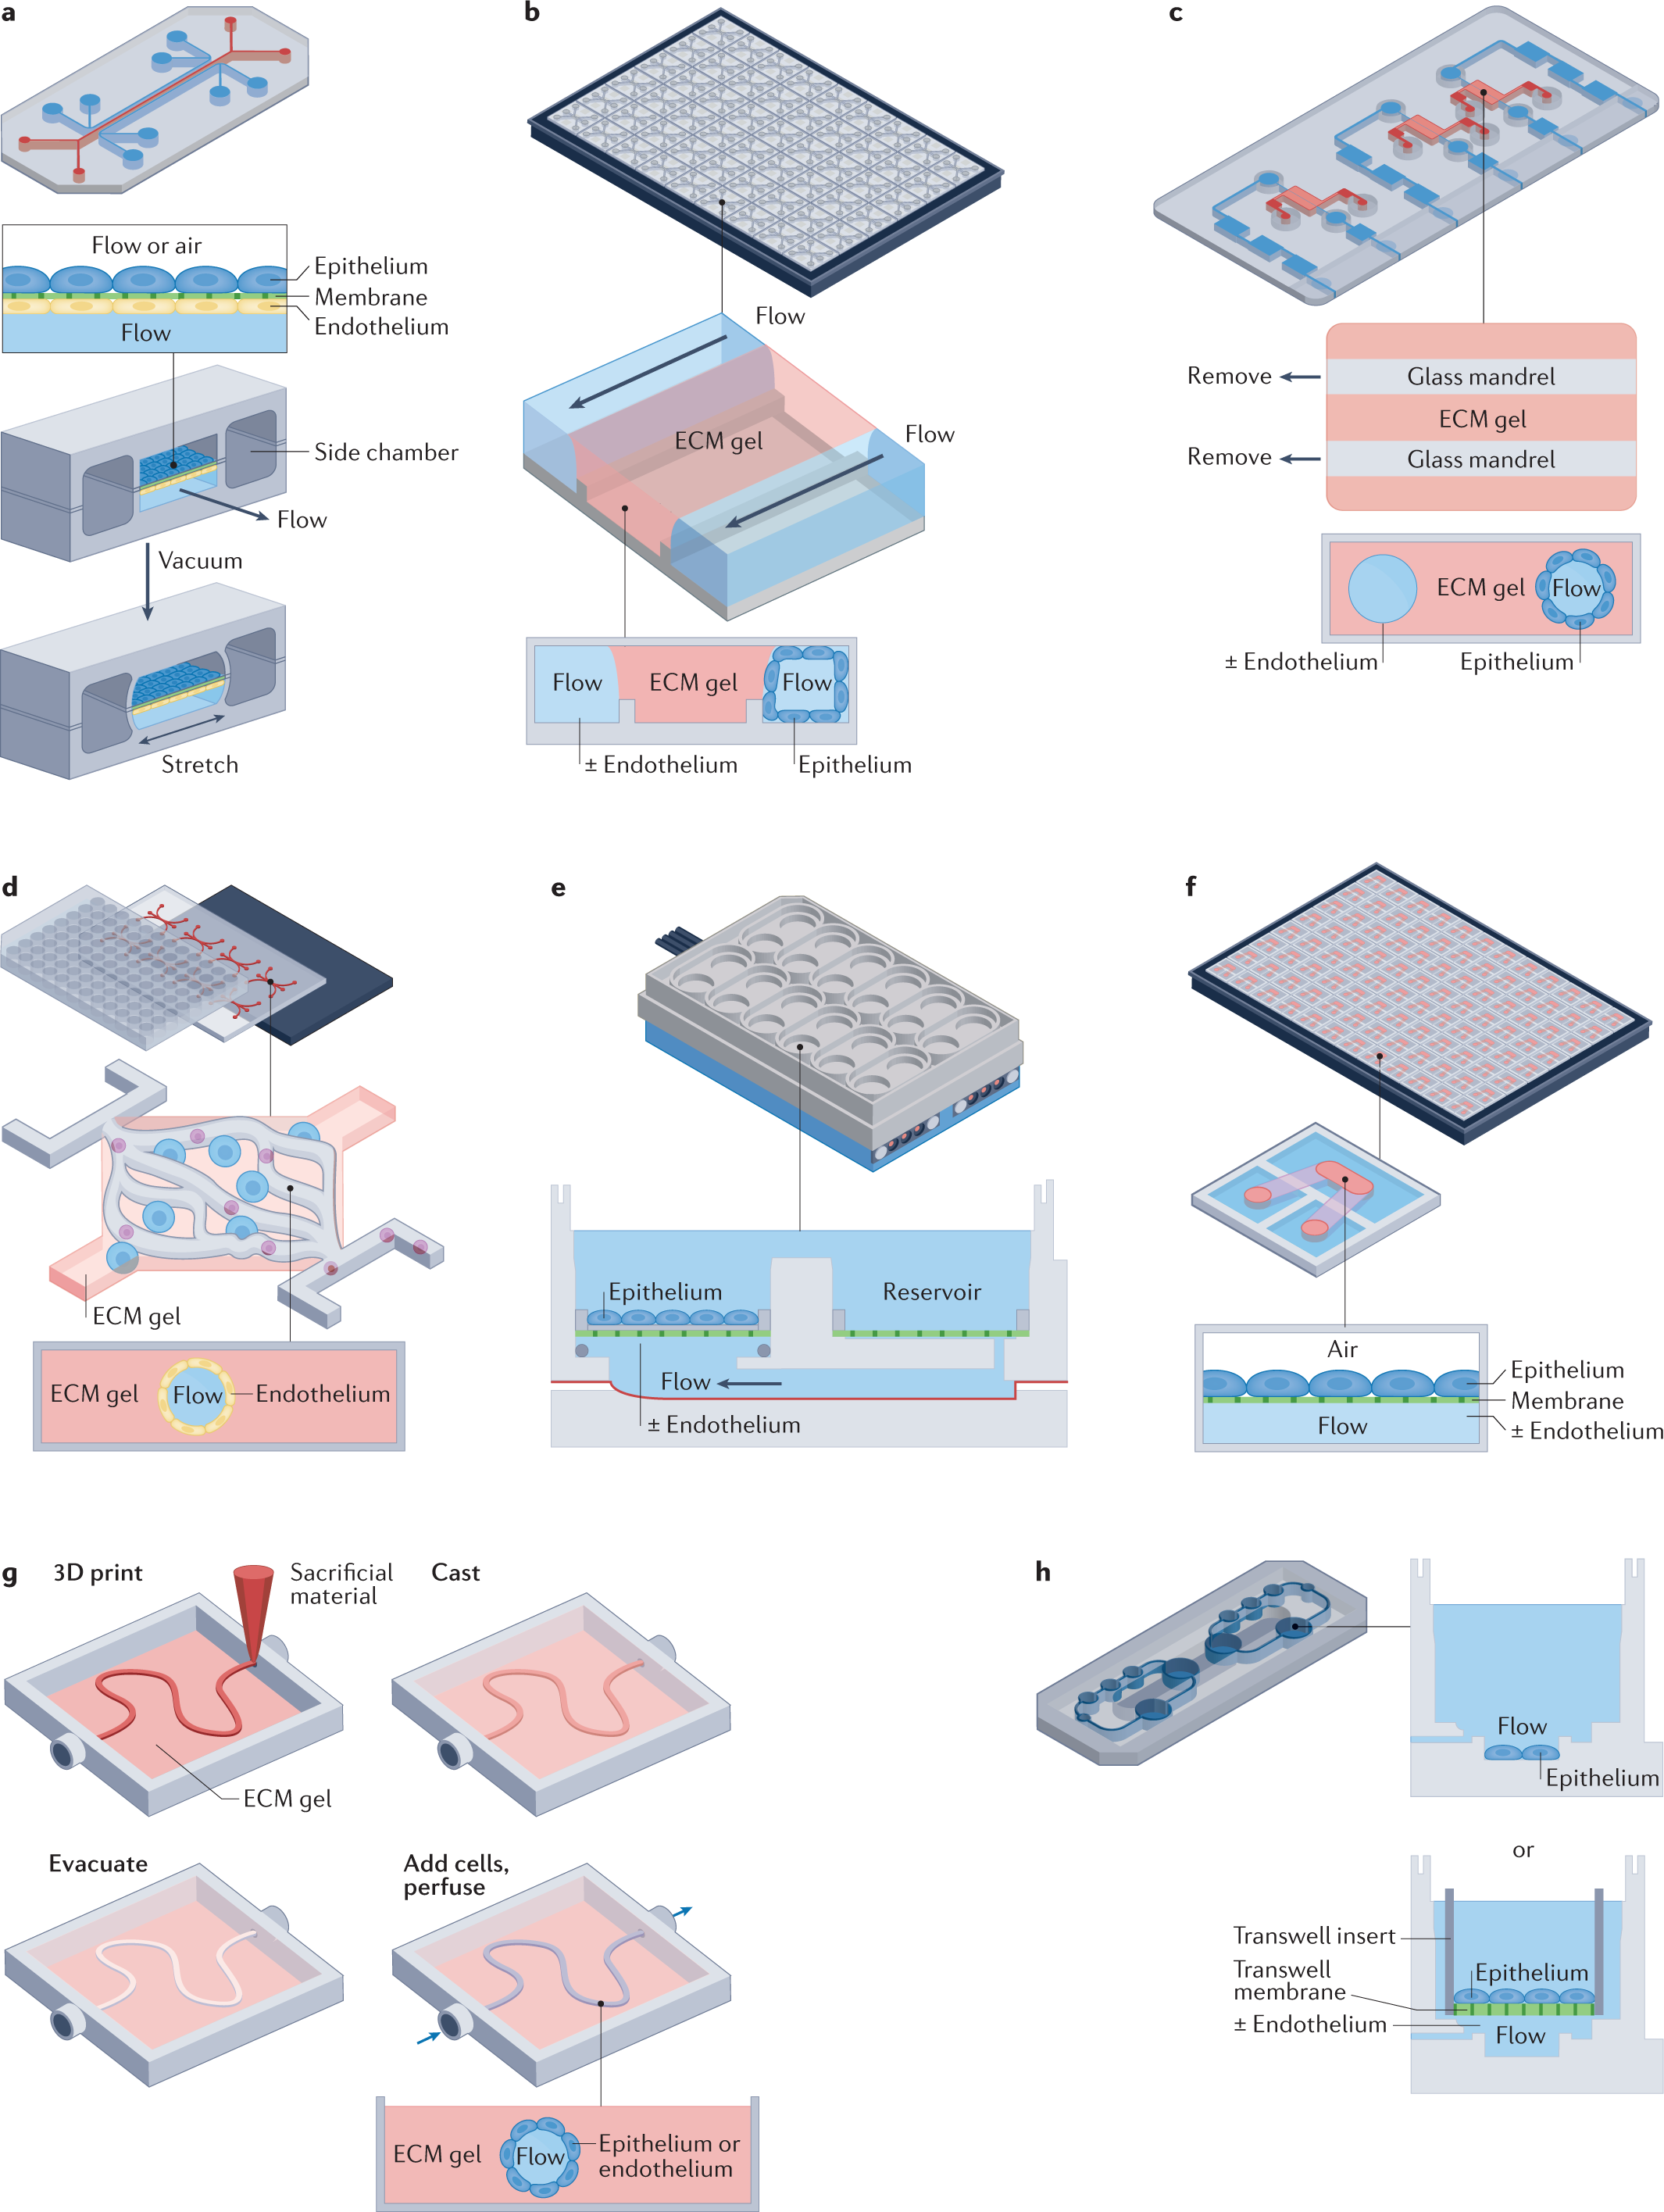 Human organs-on-chips for disease modelling, drug development and  personalized medicine | Nature Reviews Genetics